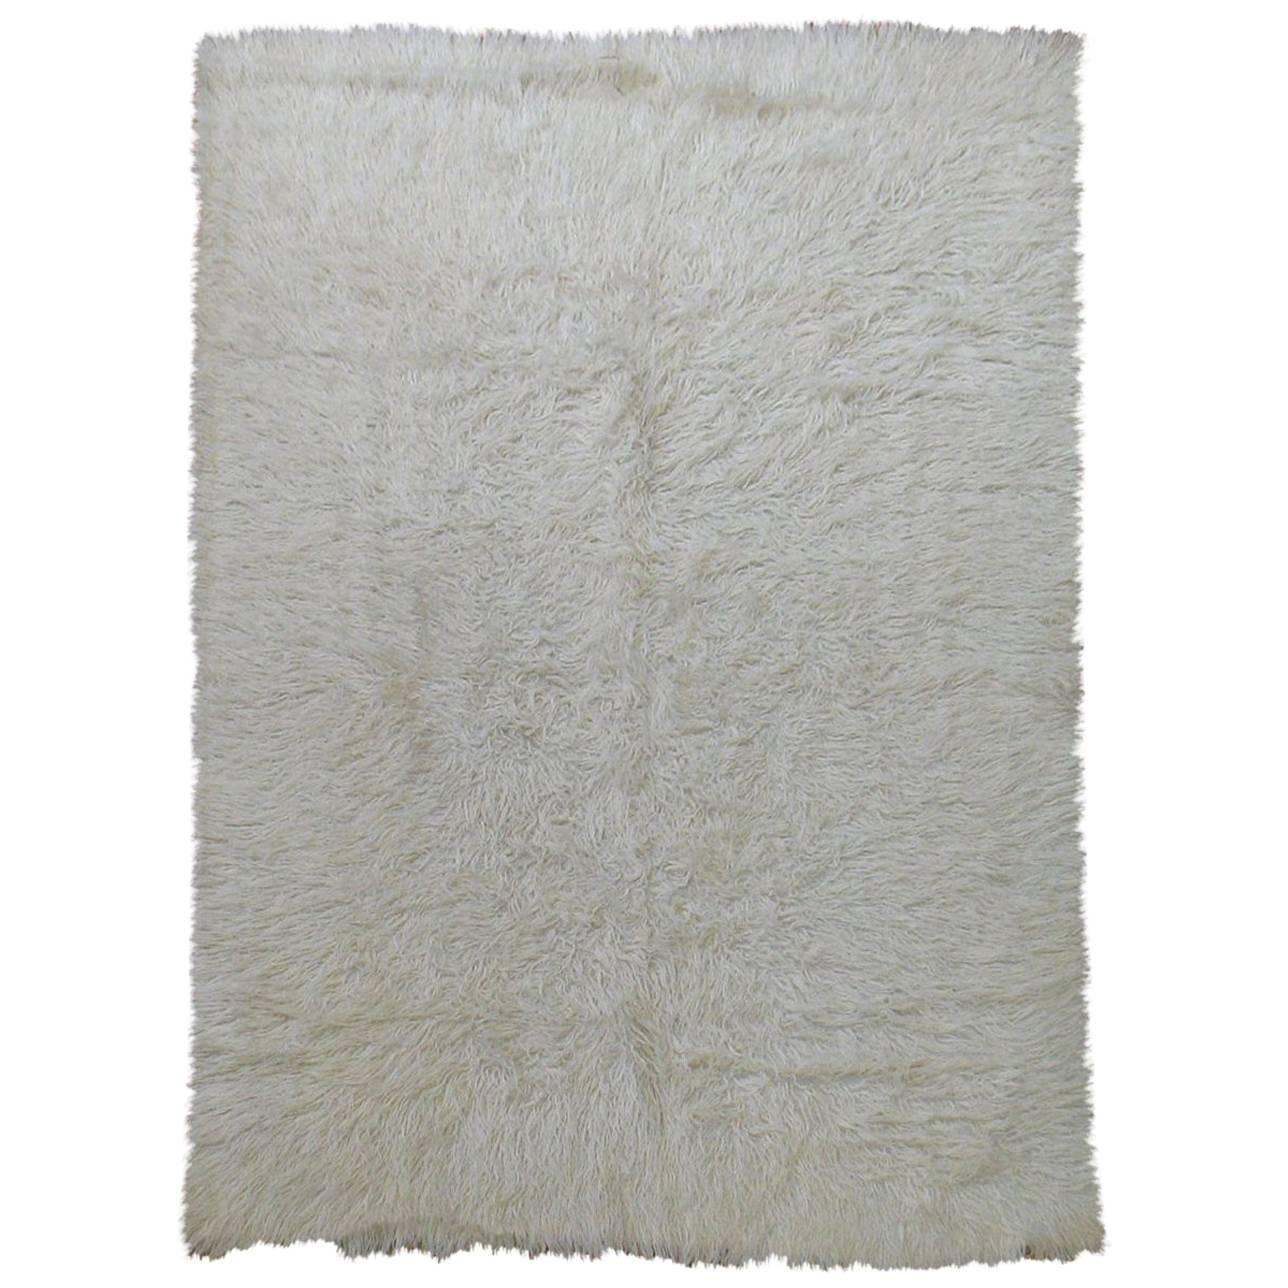 Modern inspired Turkish shag rug in a creamy yellow color

5' x 6'8''